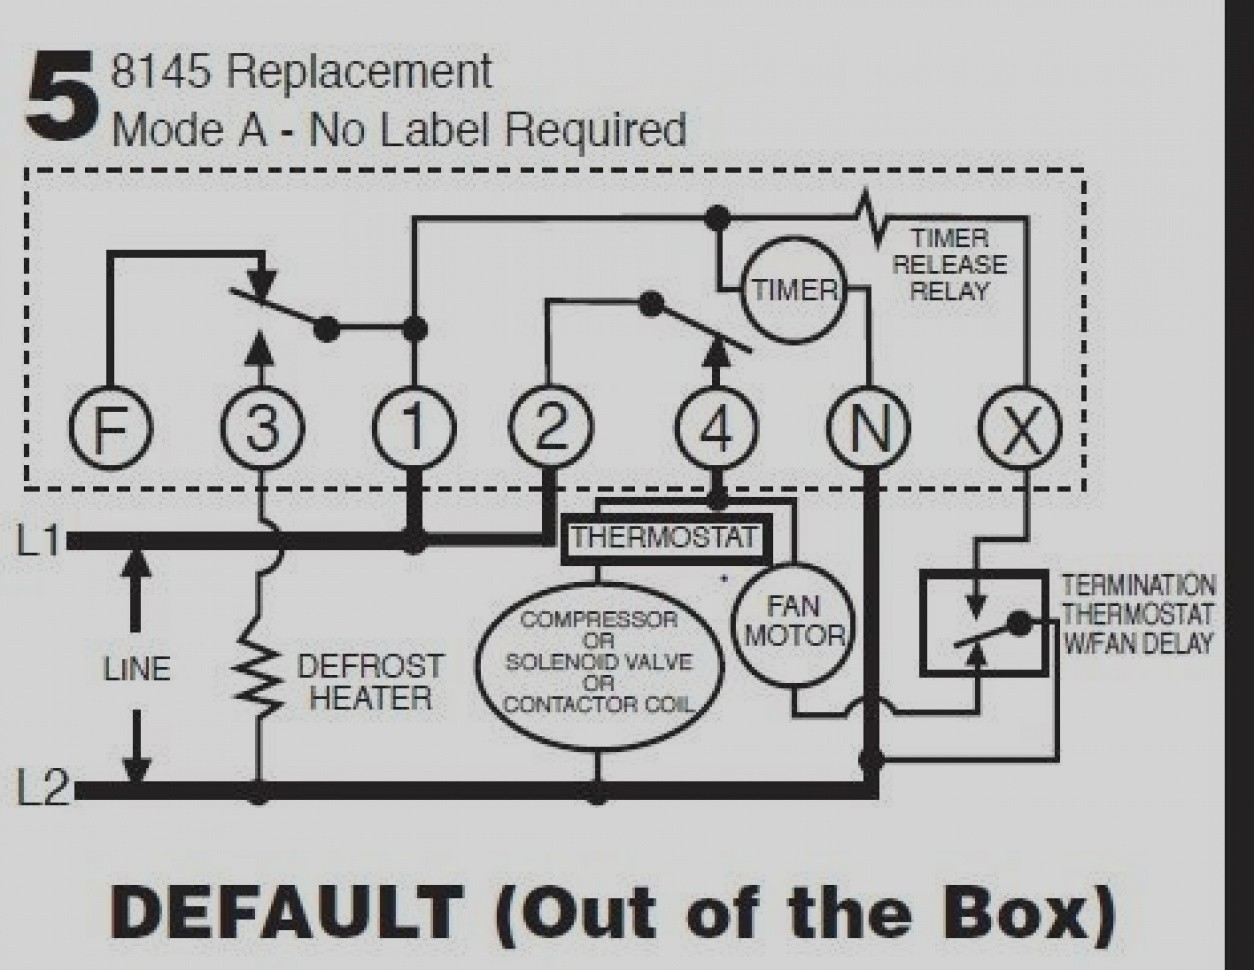 ️Paragon 8145 20 Defrost Timer Wiring Diagram Free Download Gambr.co